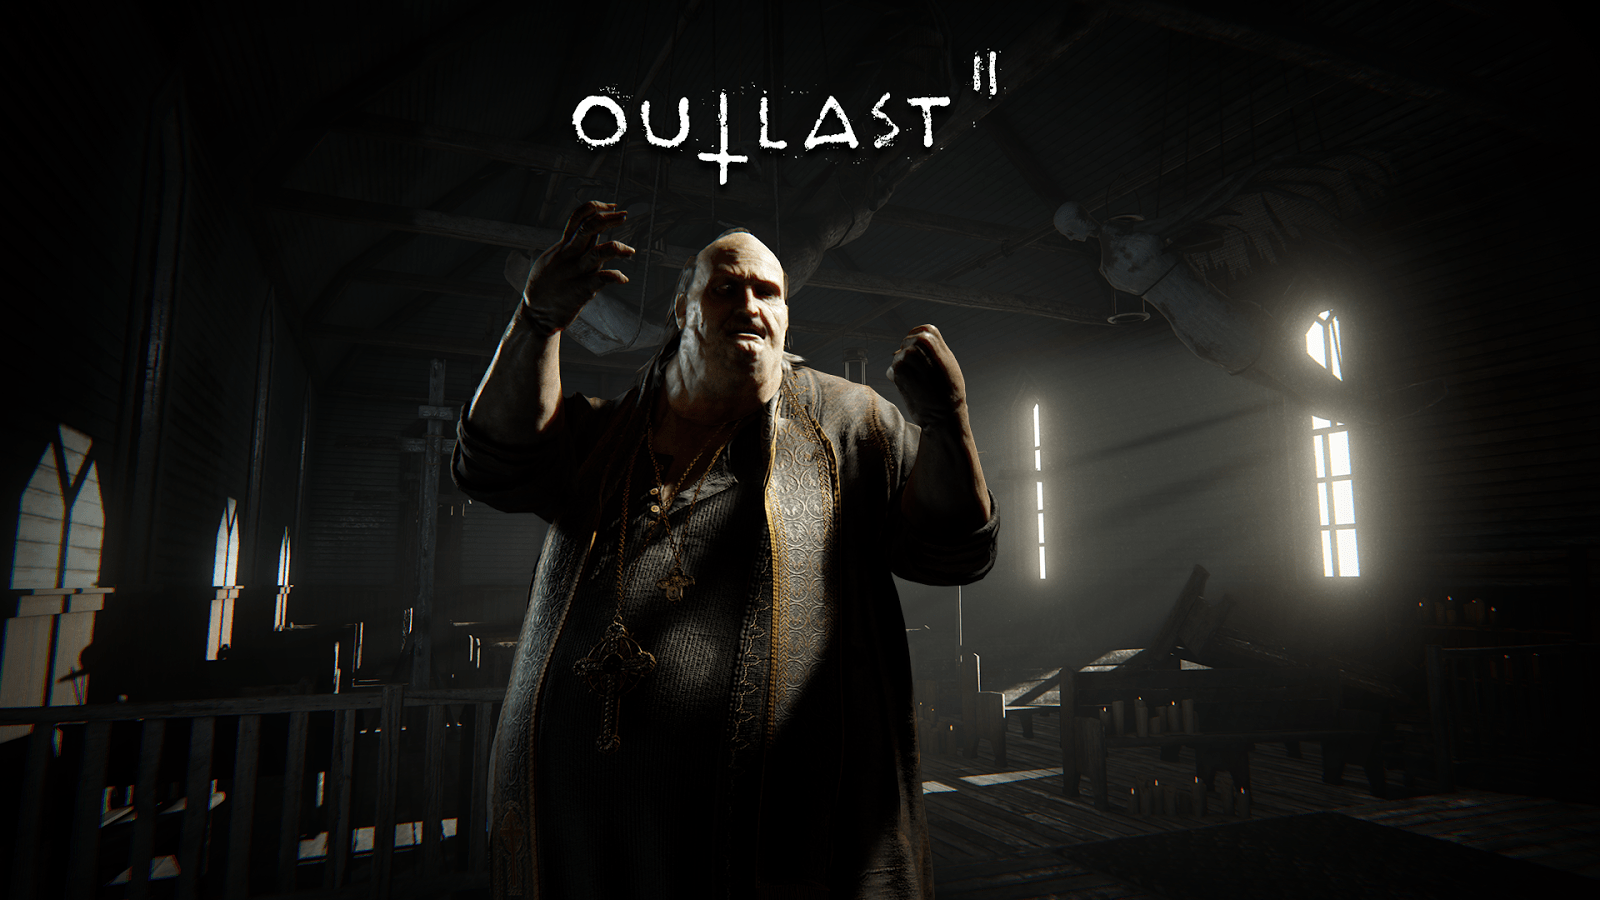 download free the outlast